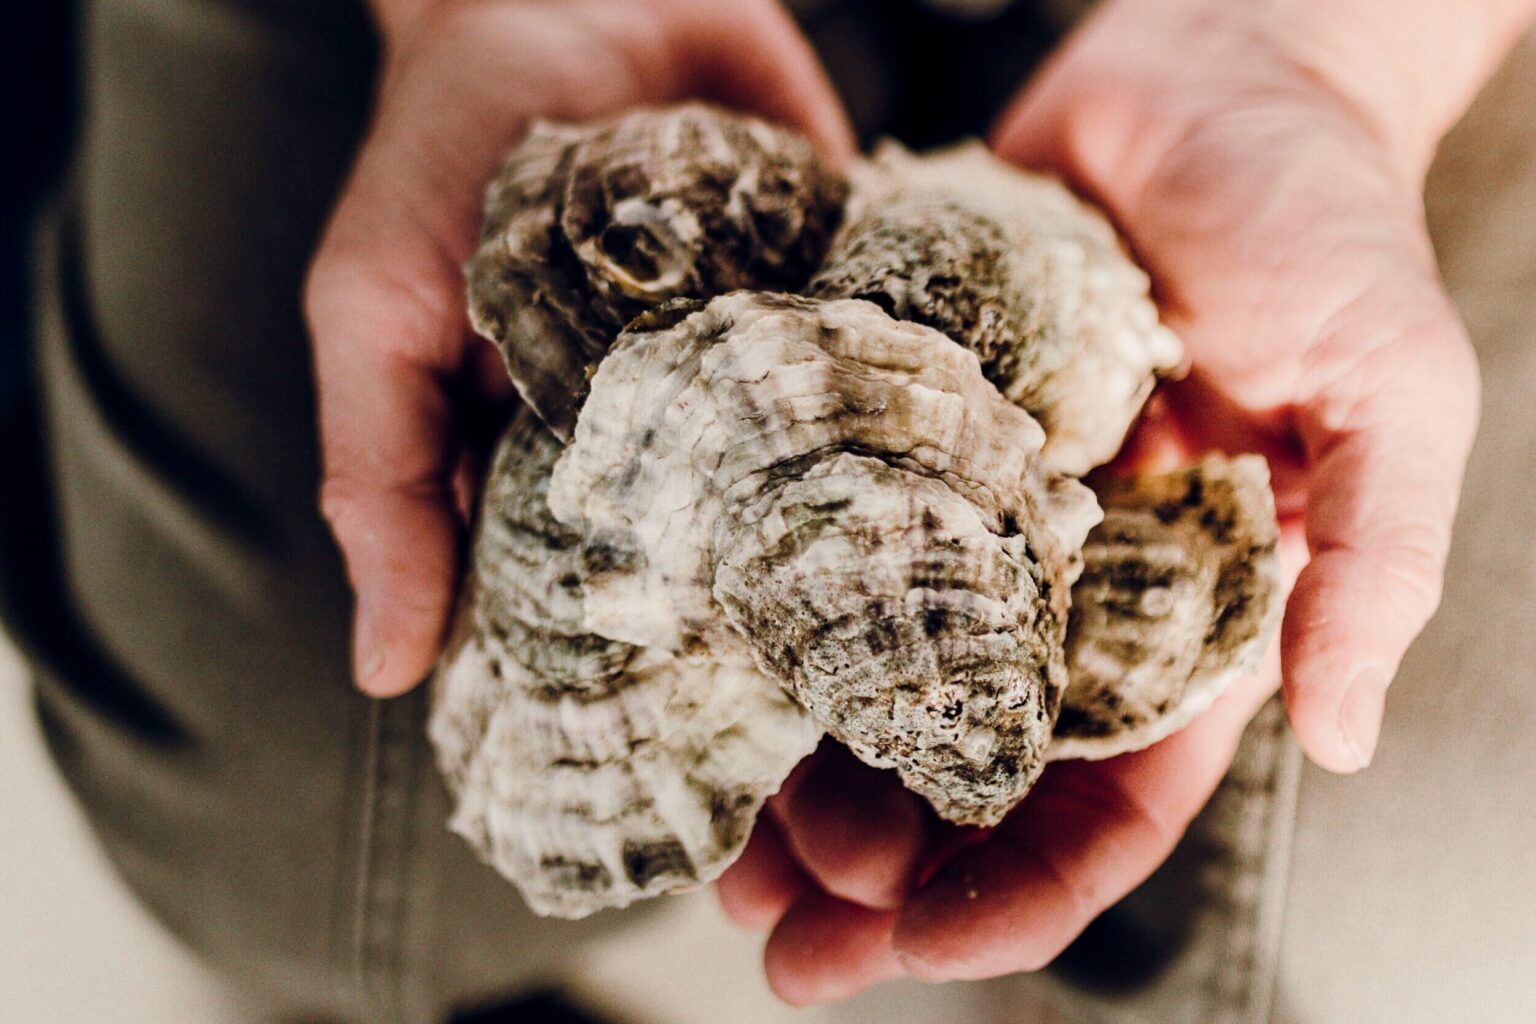 The Blind Oyster Farmer | Michael Barnett’s Story of Resilience Through Oysters